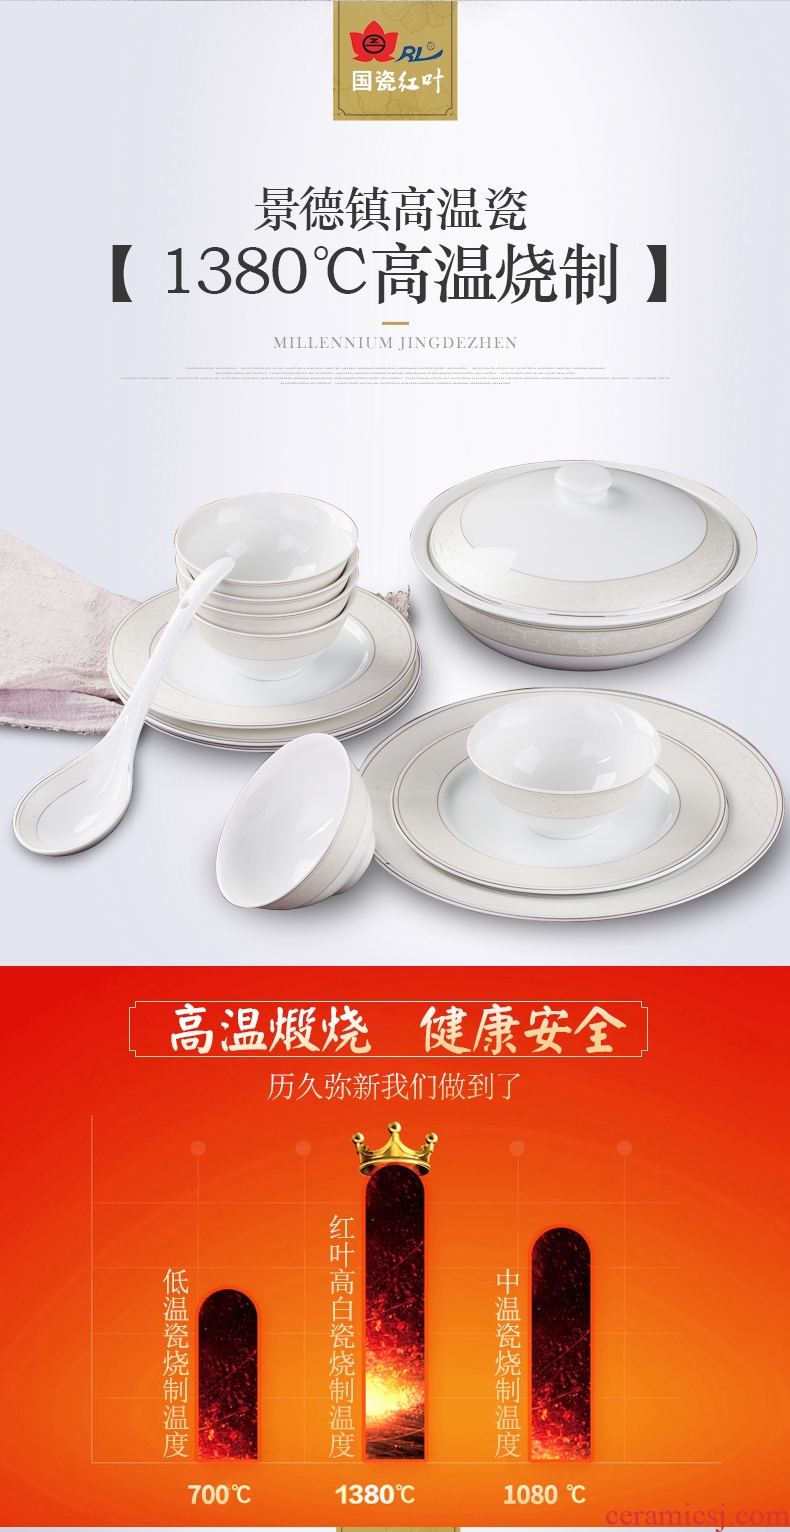 Red ceramic tableware suit jingdezhen ceramics dishes dishes european-style home 32 head non-success sheng gift box